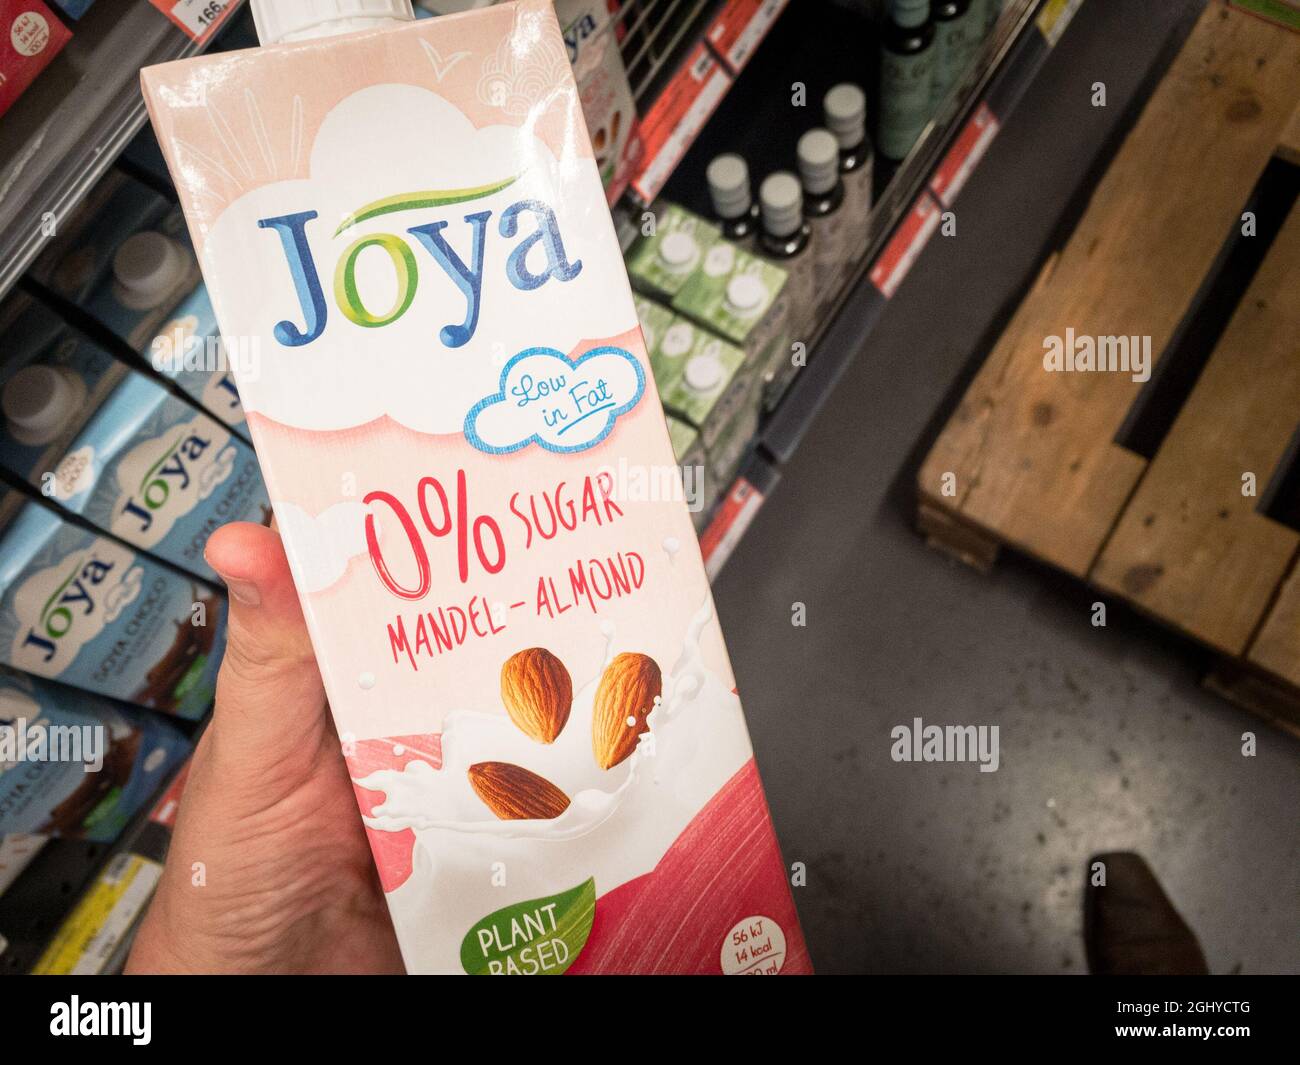 Picture of a almond milk carton bottle with the logo of Joya for sale